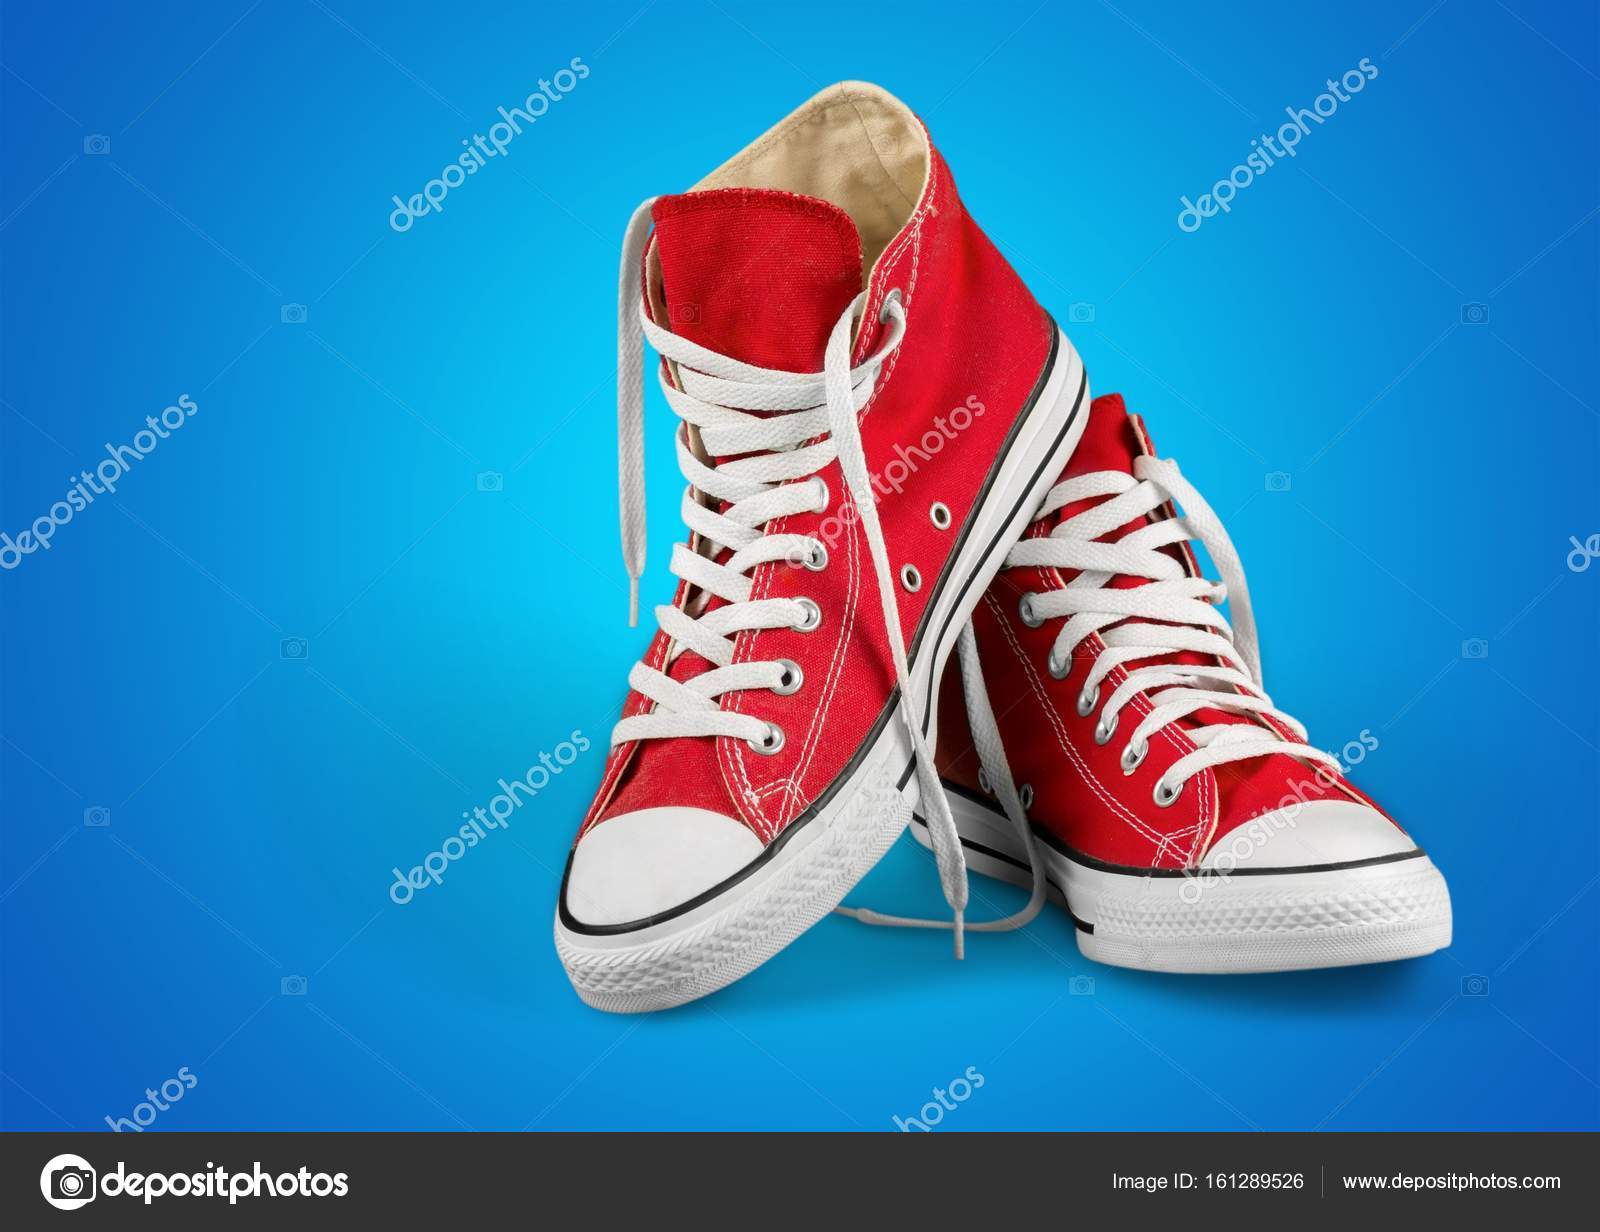 Trendy red shoes — Stock Photo 